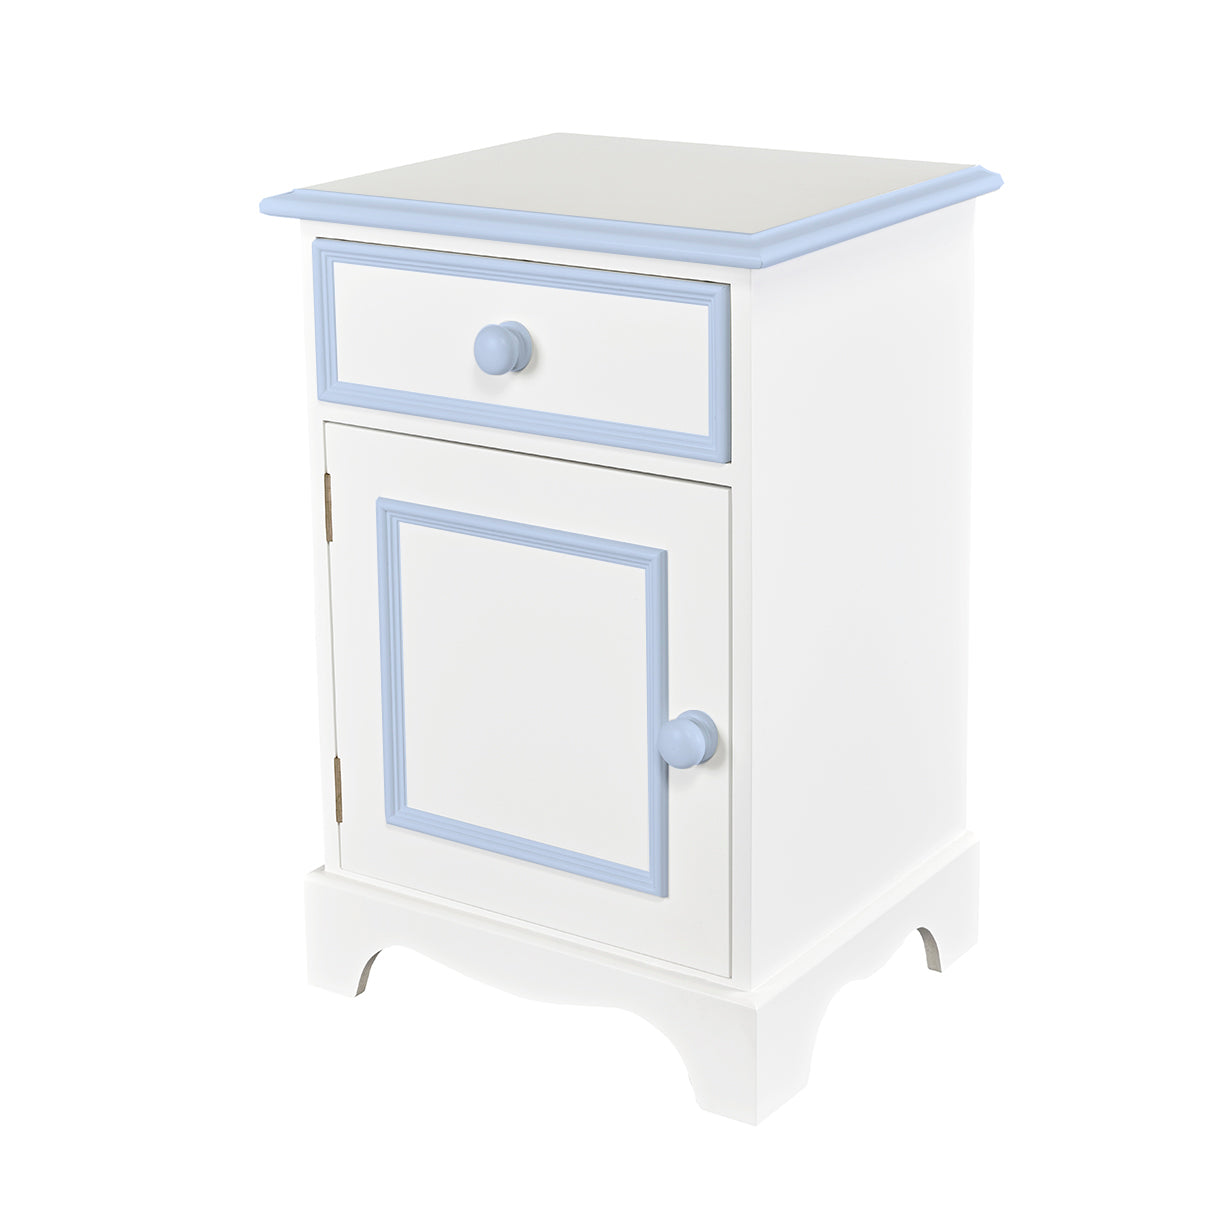 White and blue bedside table with drawer for kids room & nursery | Dragons of Walton Street